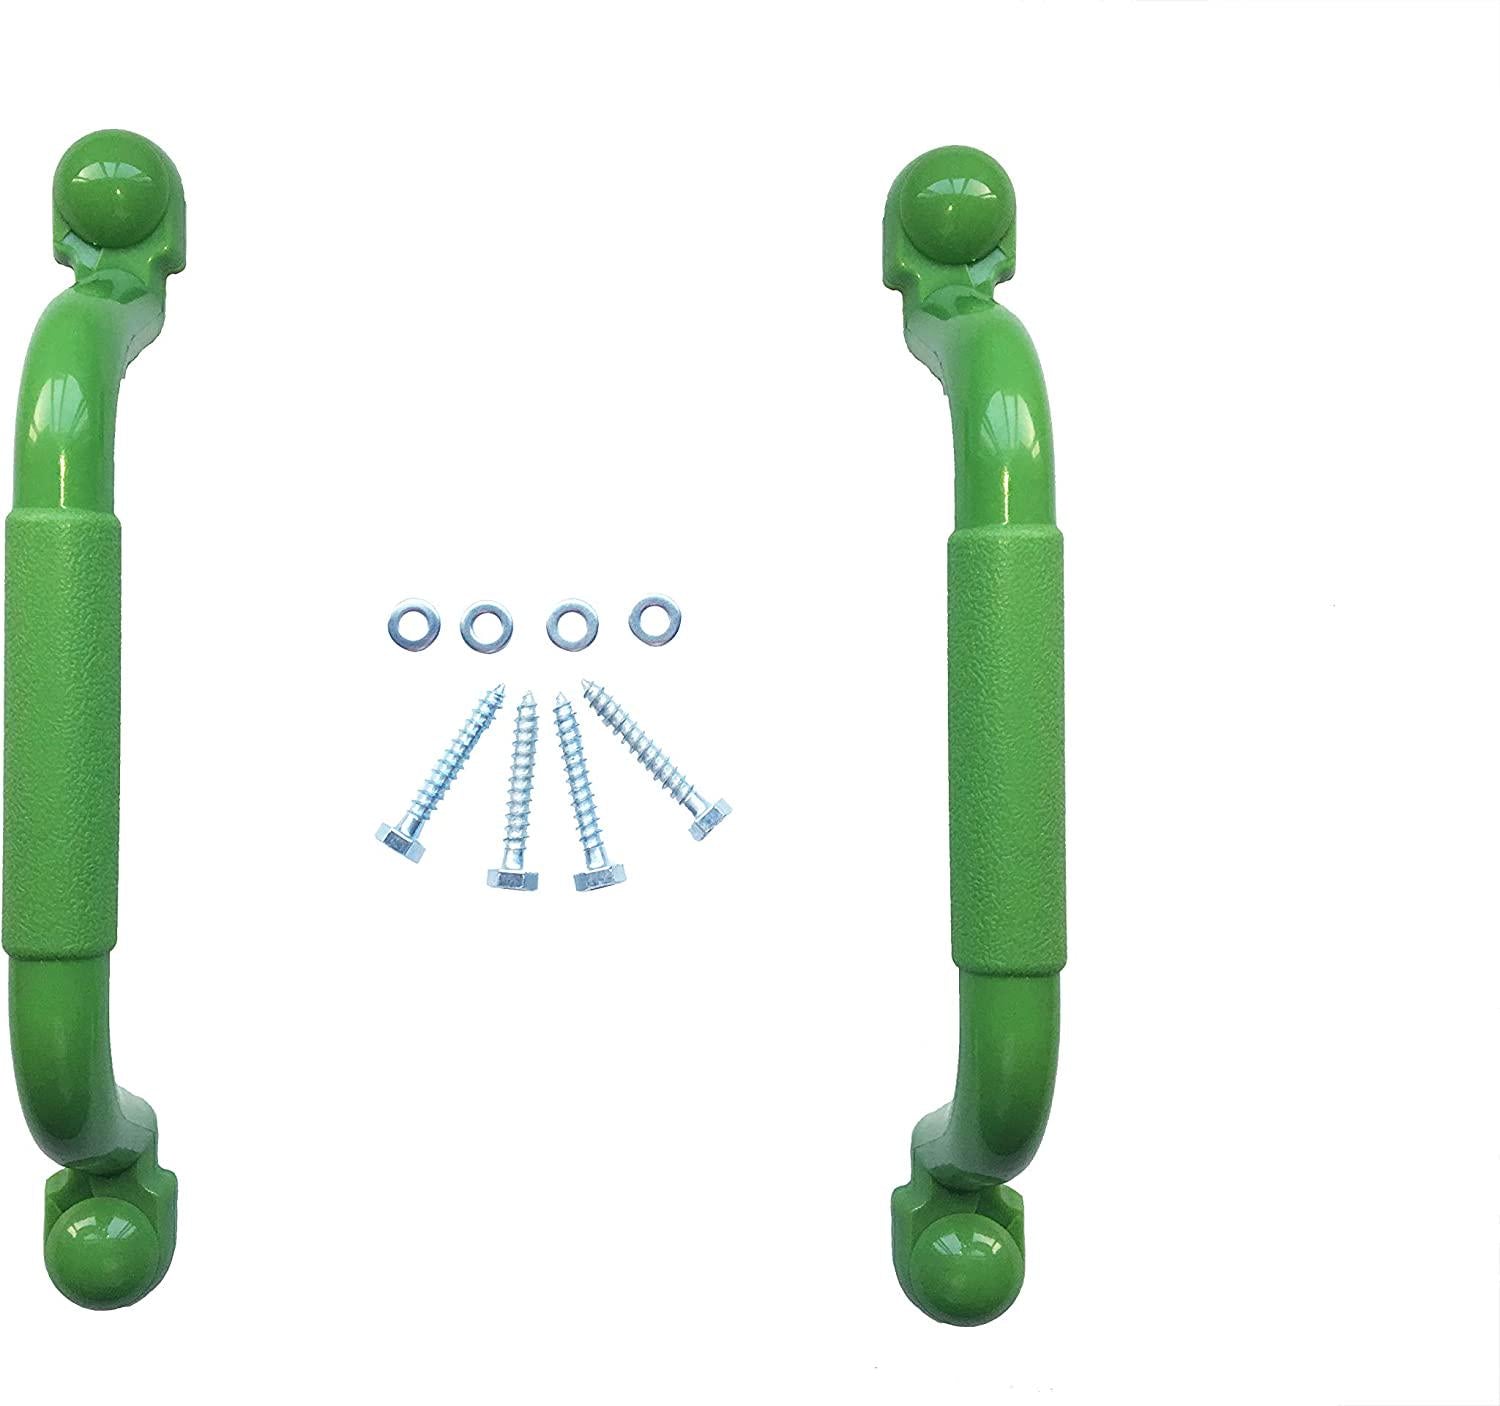 KINSPORY, KINSPORY 10.6'' Kids Safety Handle Grips with Dermatoglyph for Outdoor Climbing Frame (Green)